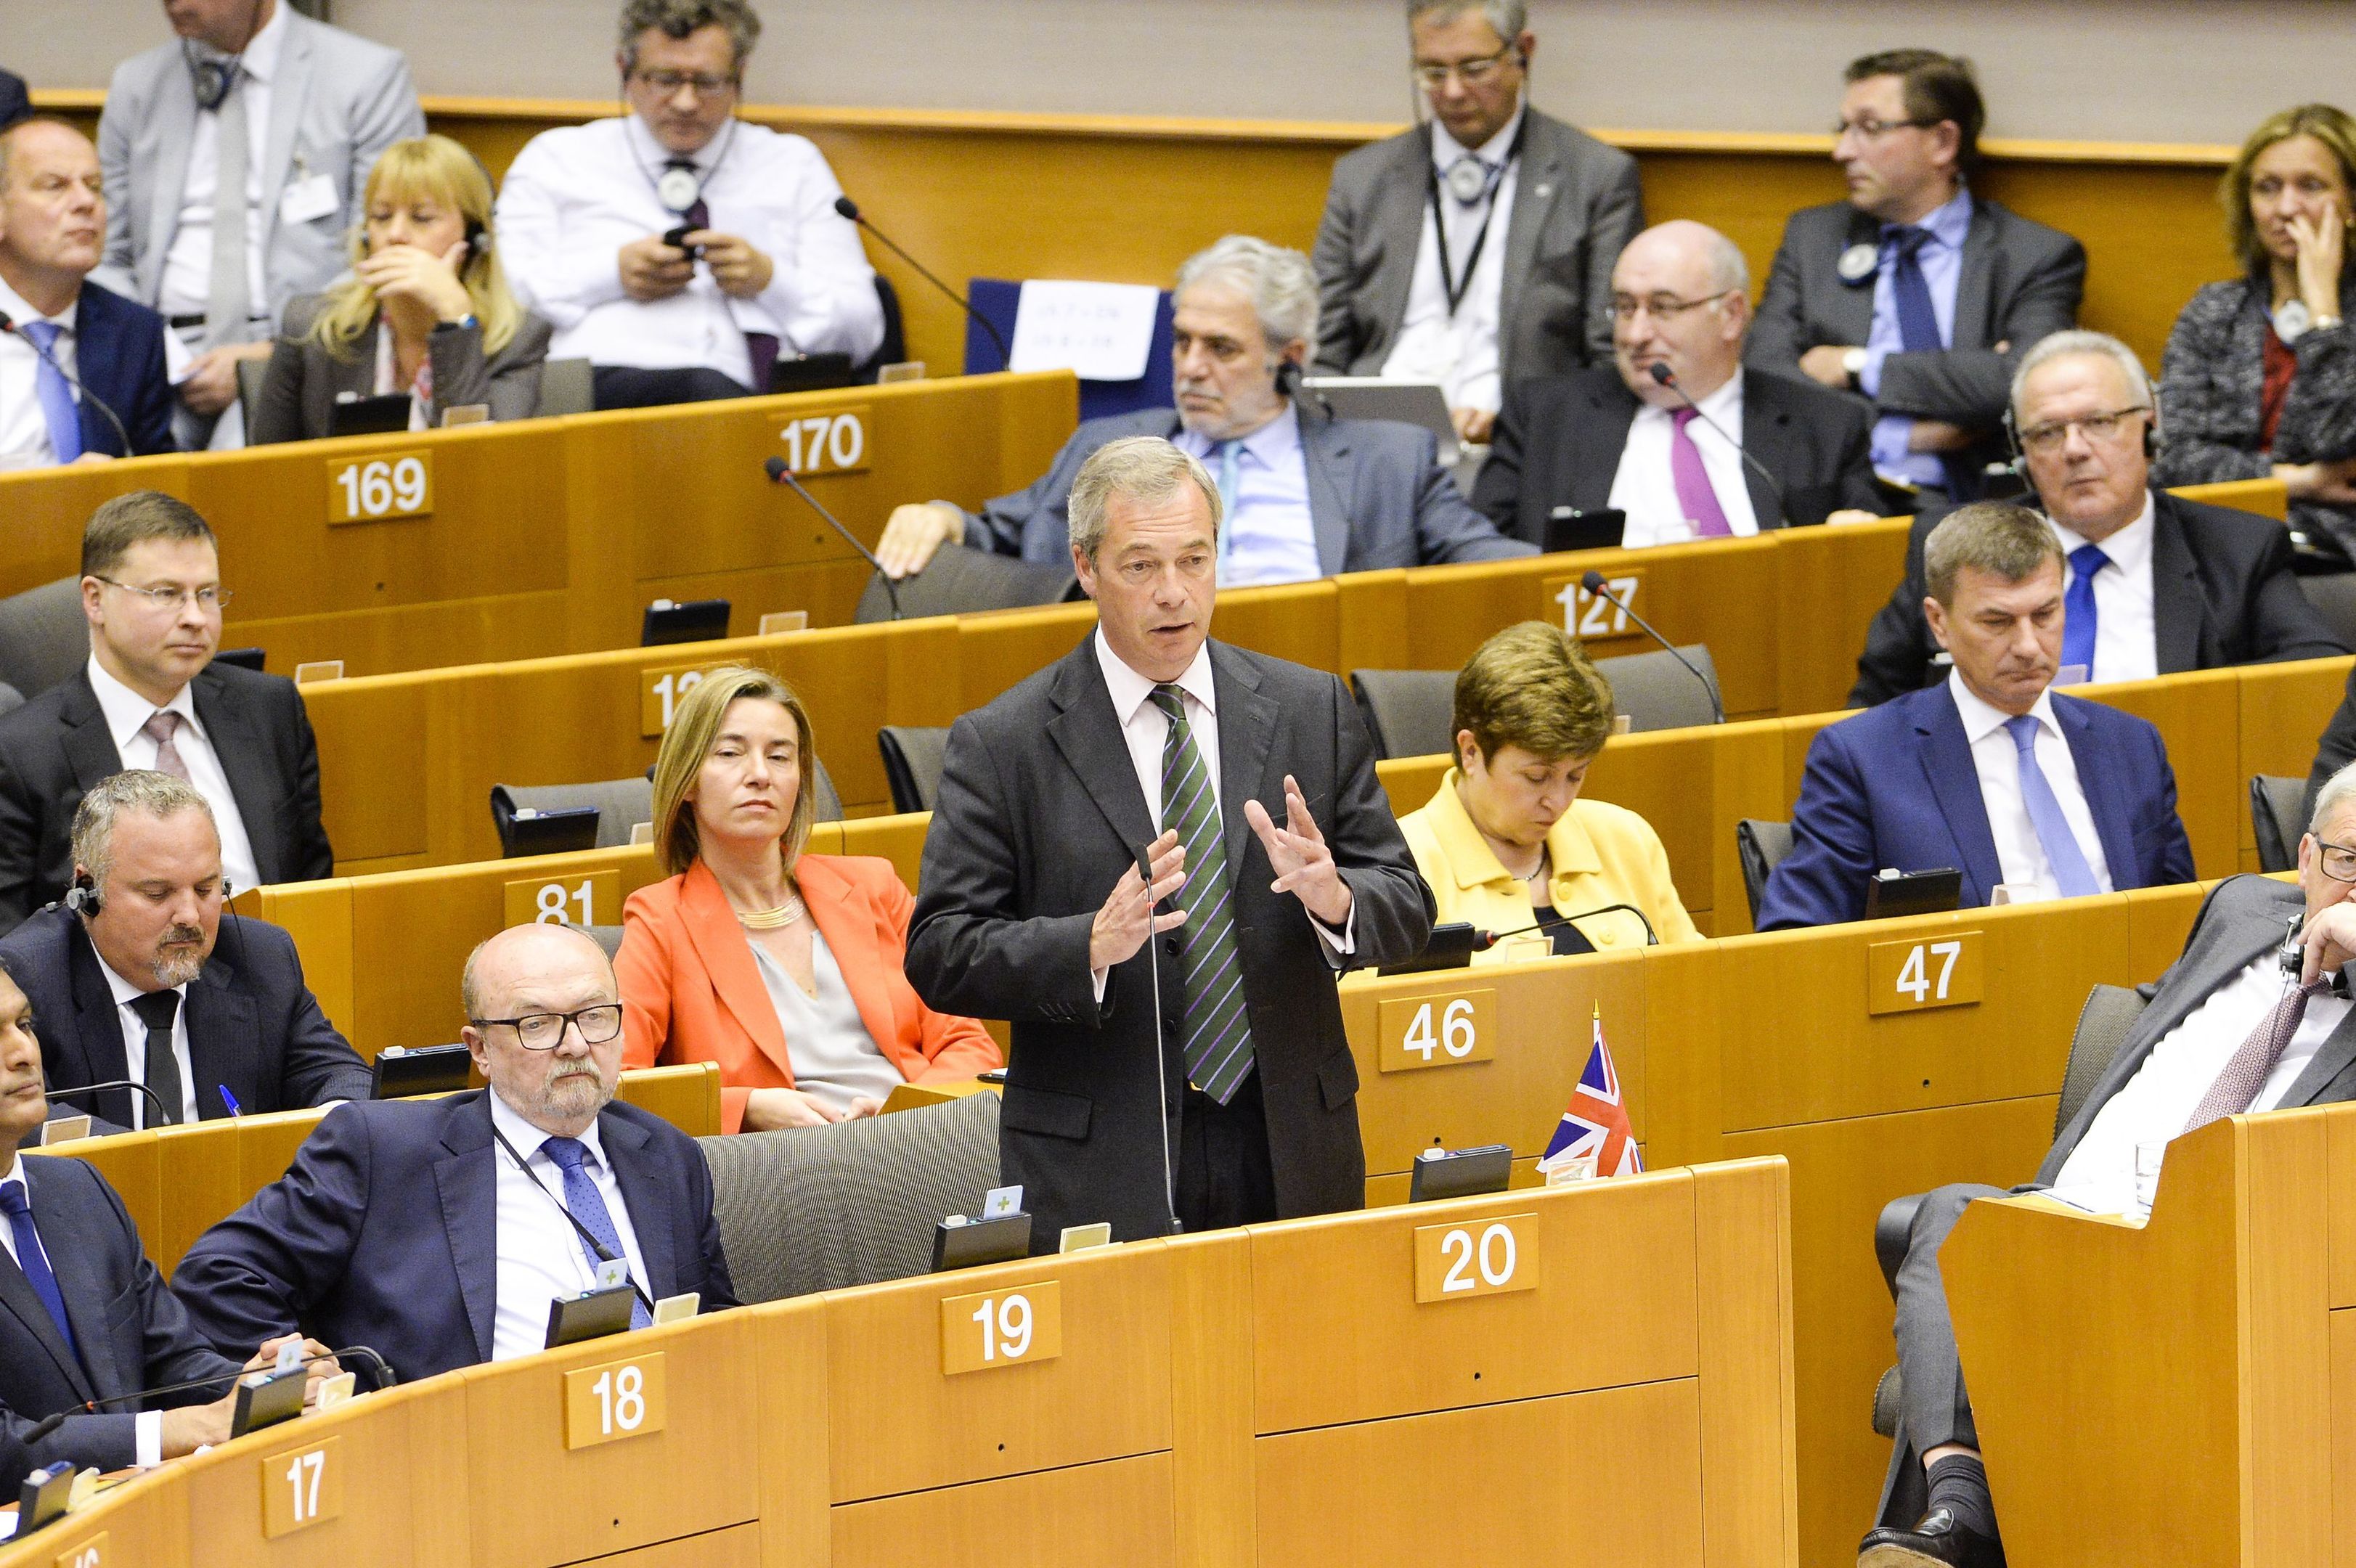 Nigel Farage speaking at the European Parliament in Brussels during an emergency session to discuss the fallout from the Brexit vote.